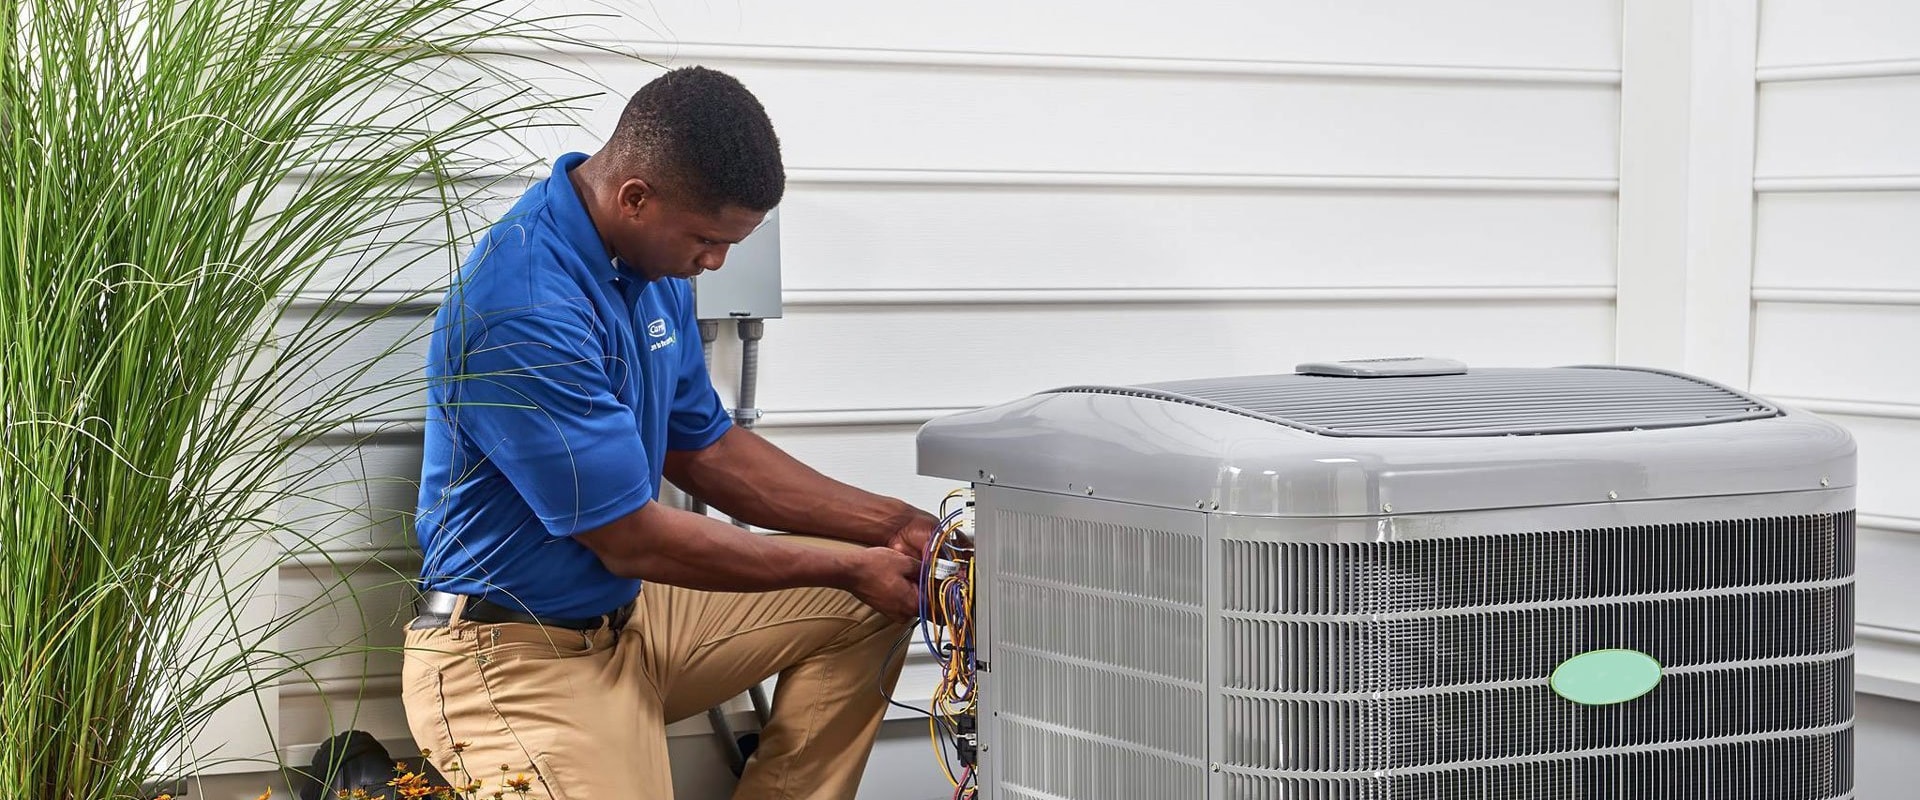 What type of customer service does the hvac installation company provide?